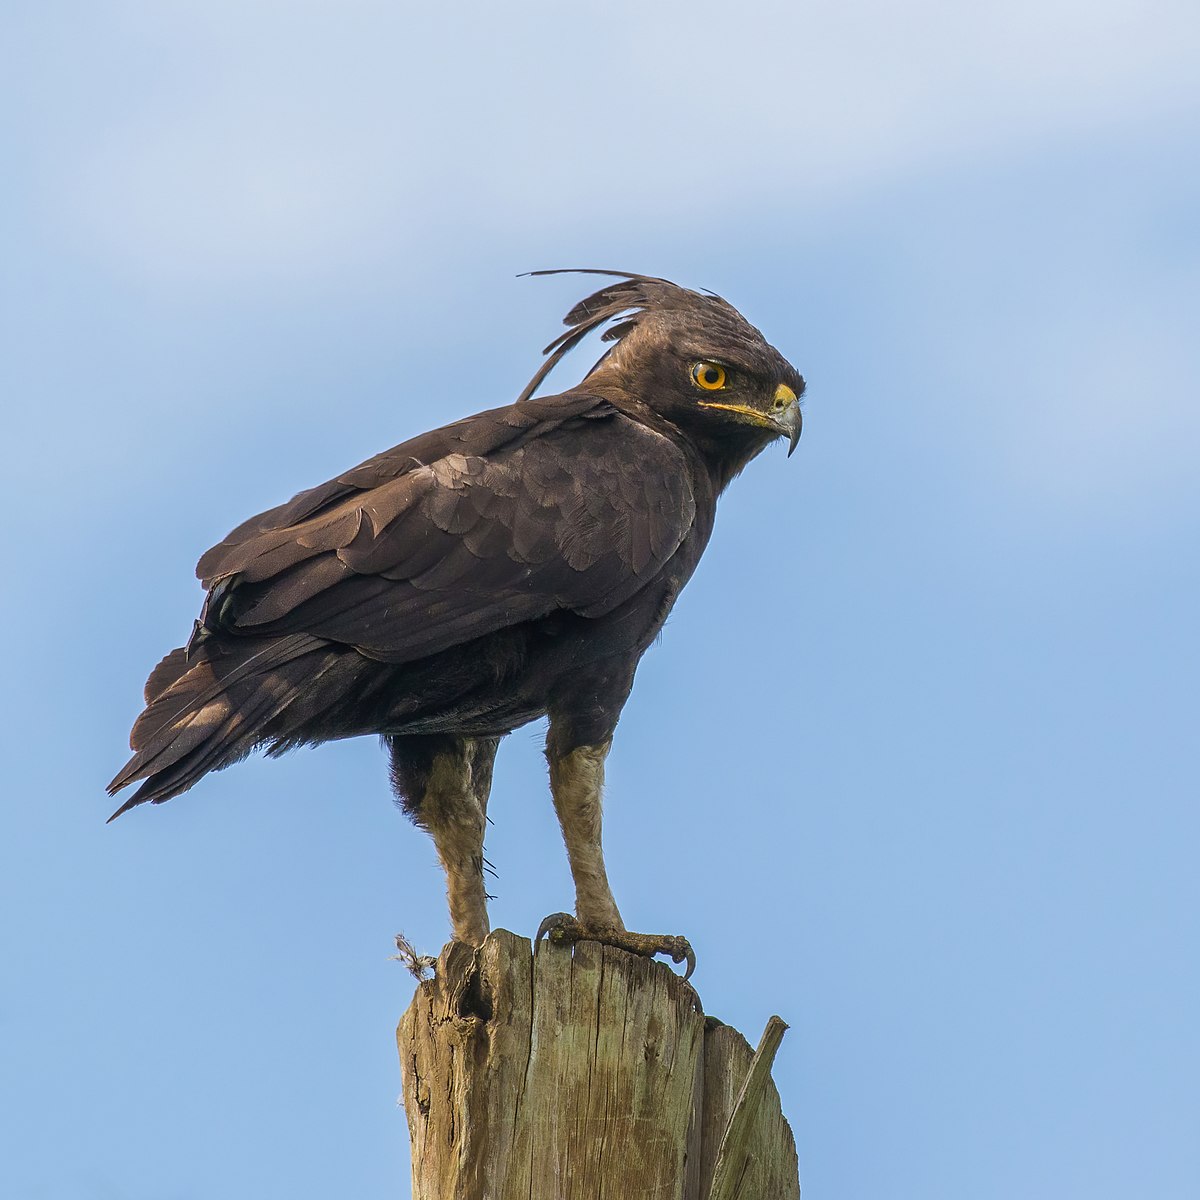 how smart is a crested eagle